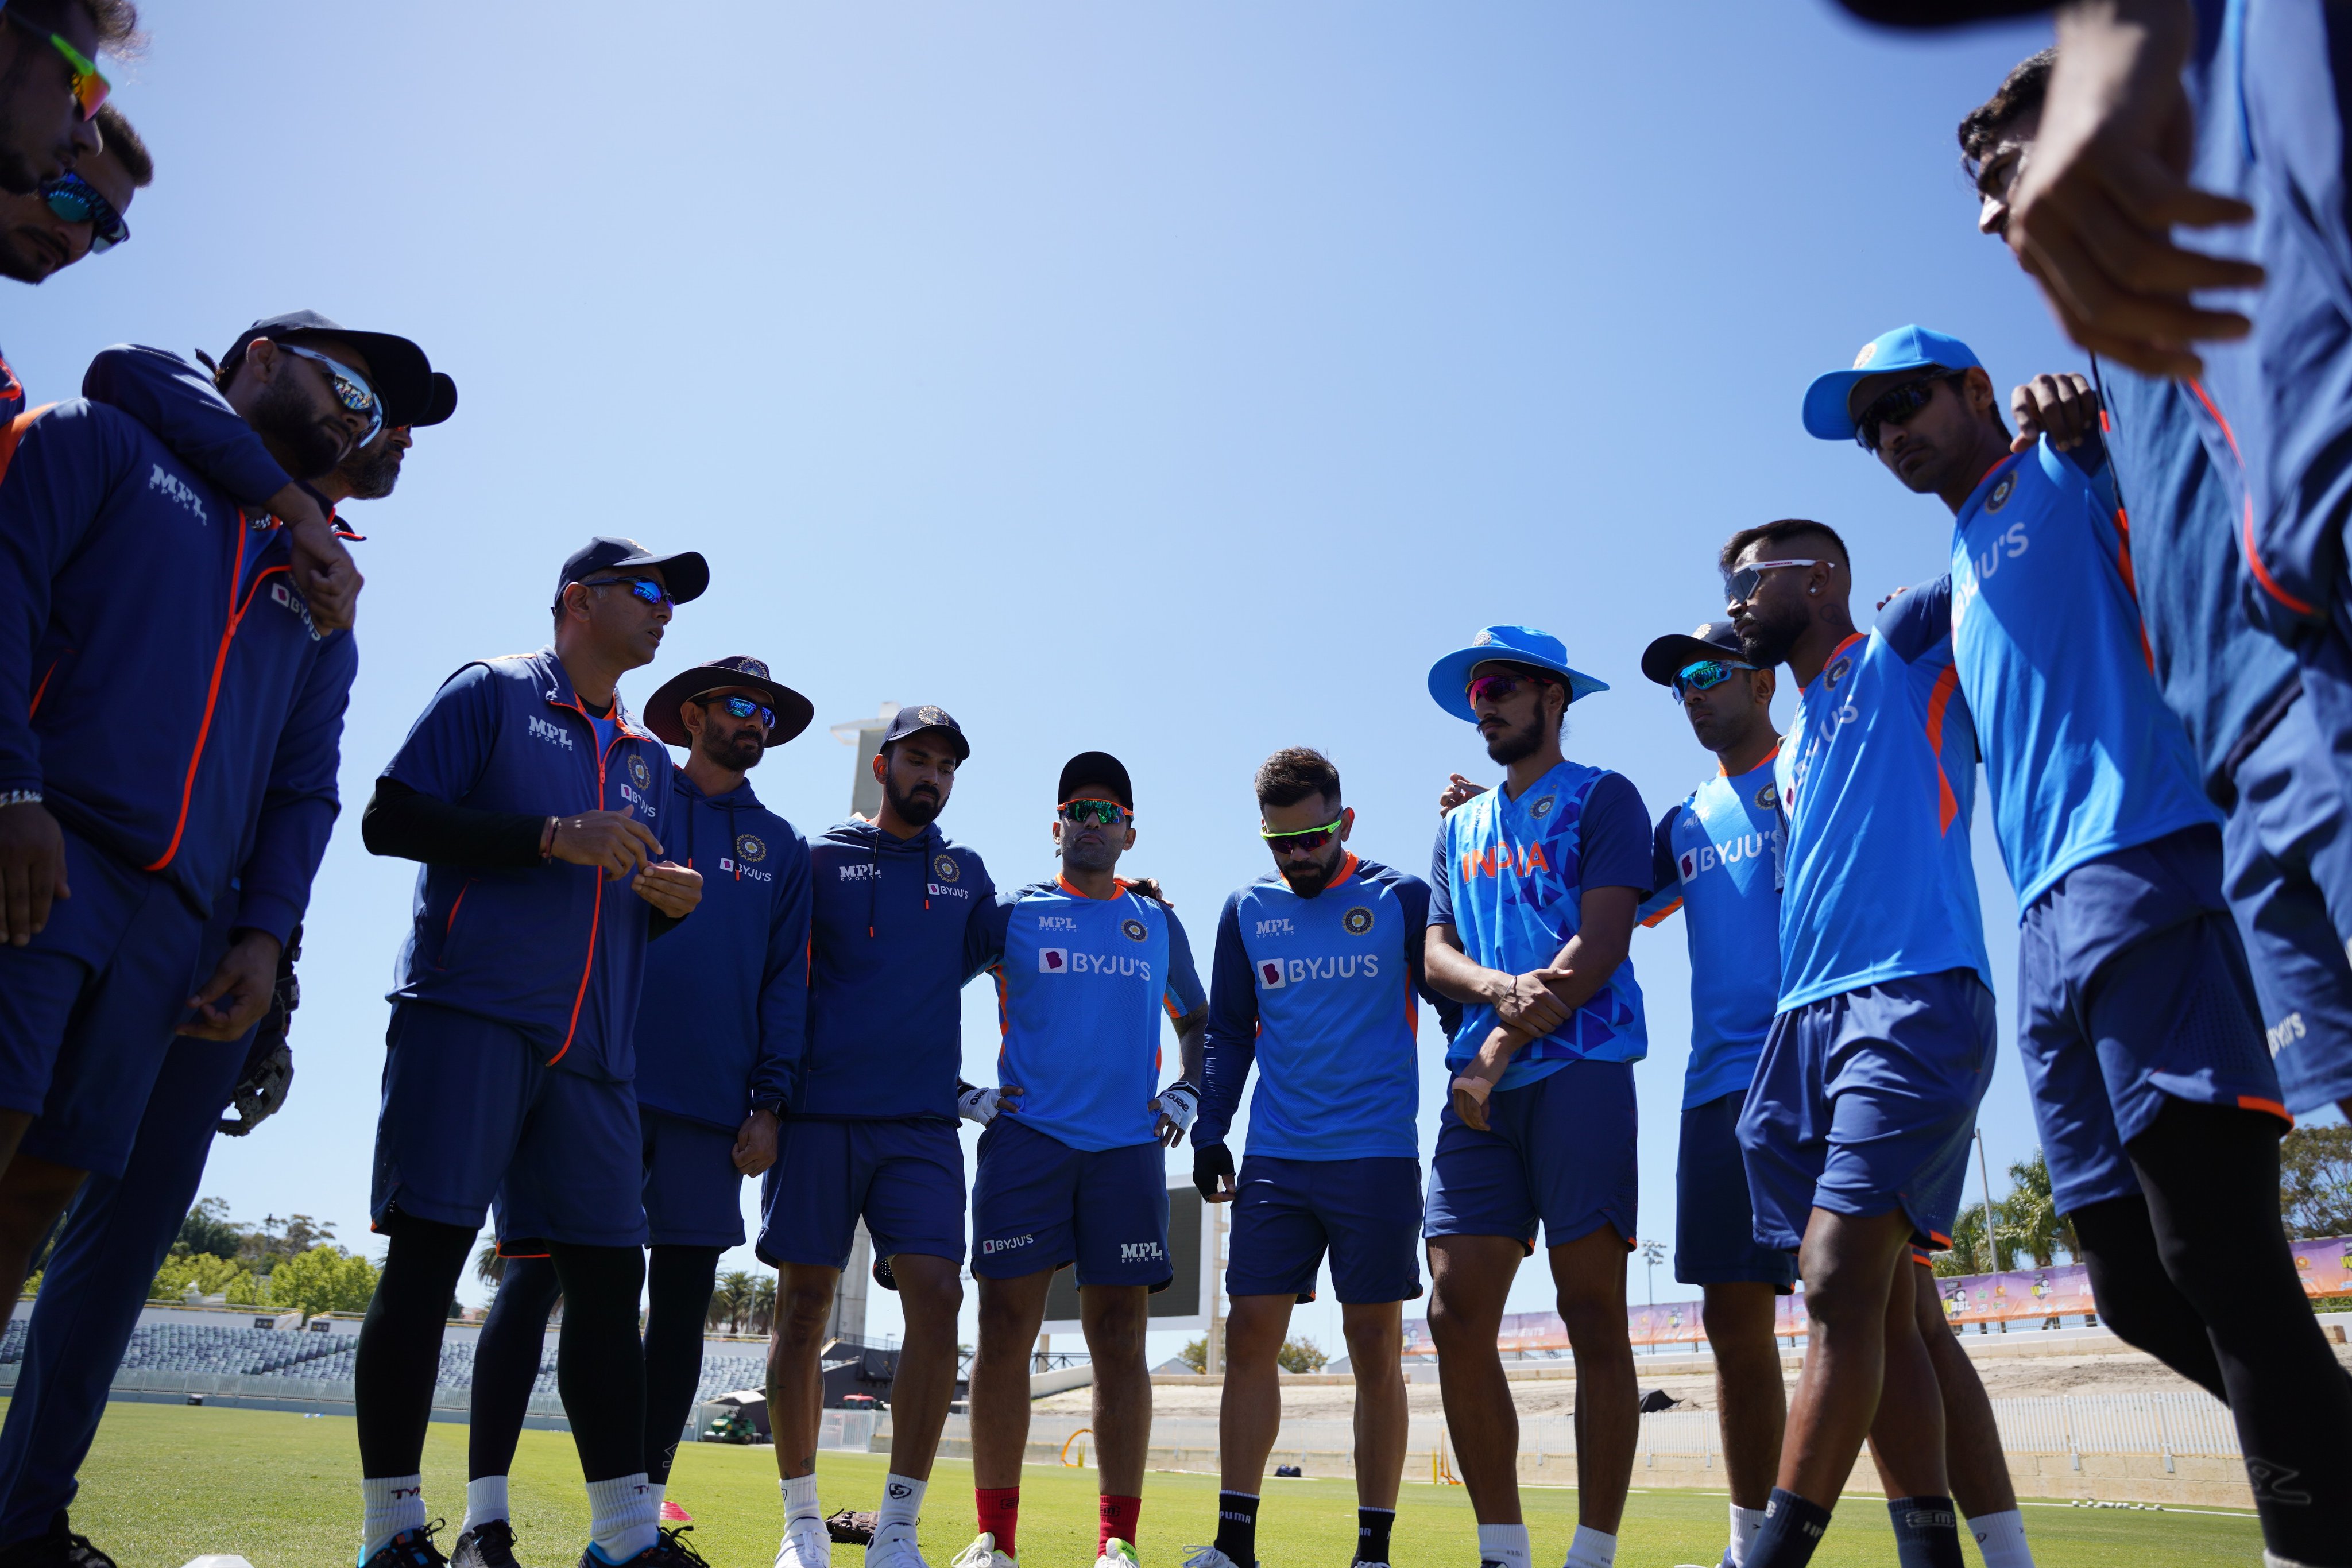 IND vs AUS Warm-Up LIVE: Mohammad Shami set to return to India Playing XI vs AUS, IND vs AUS LIVE, India vs Australia LIVE, ICC T20 World Cup Warm-Up LIVE